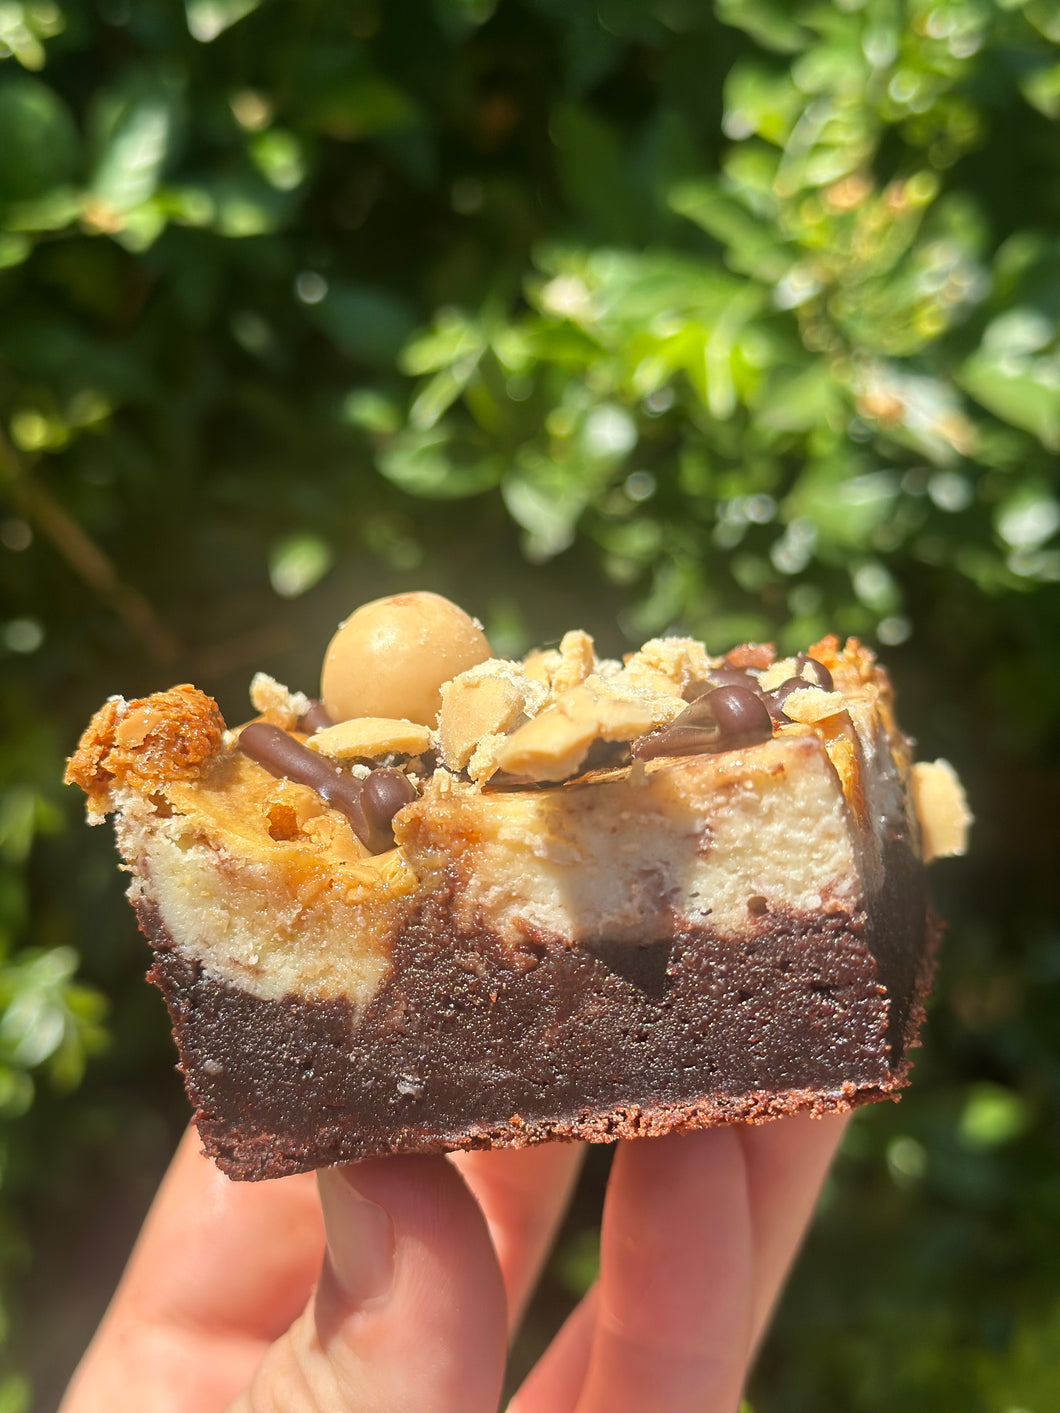 FLAVOUR OF THE MONTH! Gold Malteser Cheesecake Brownie